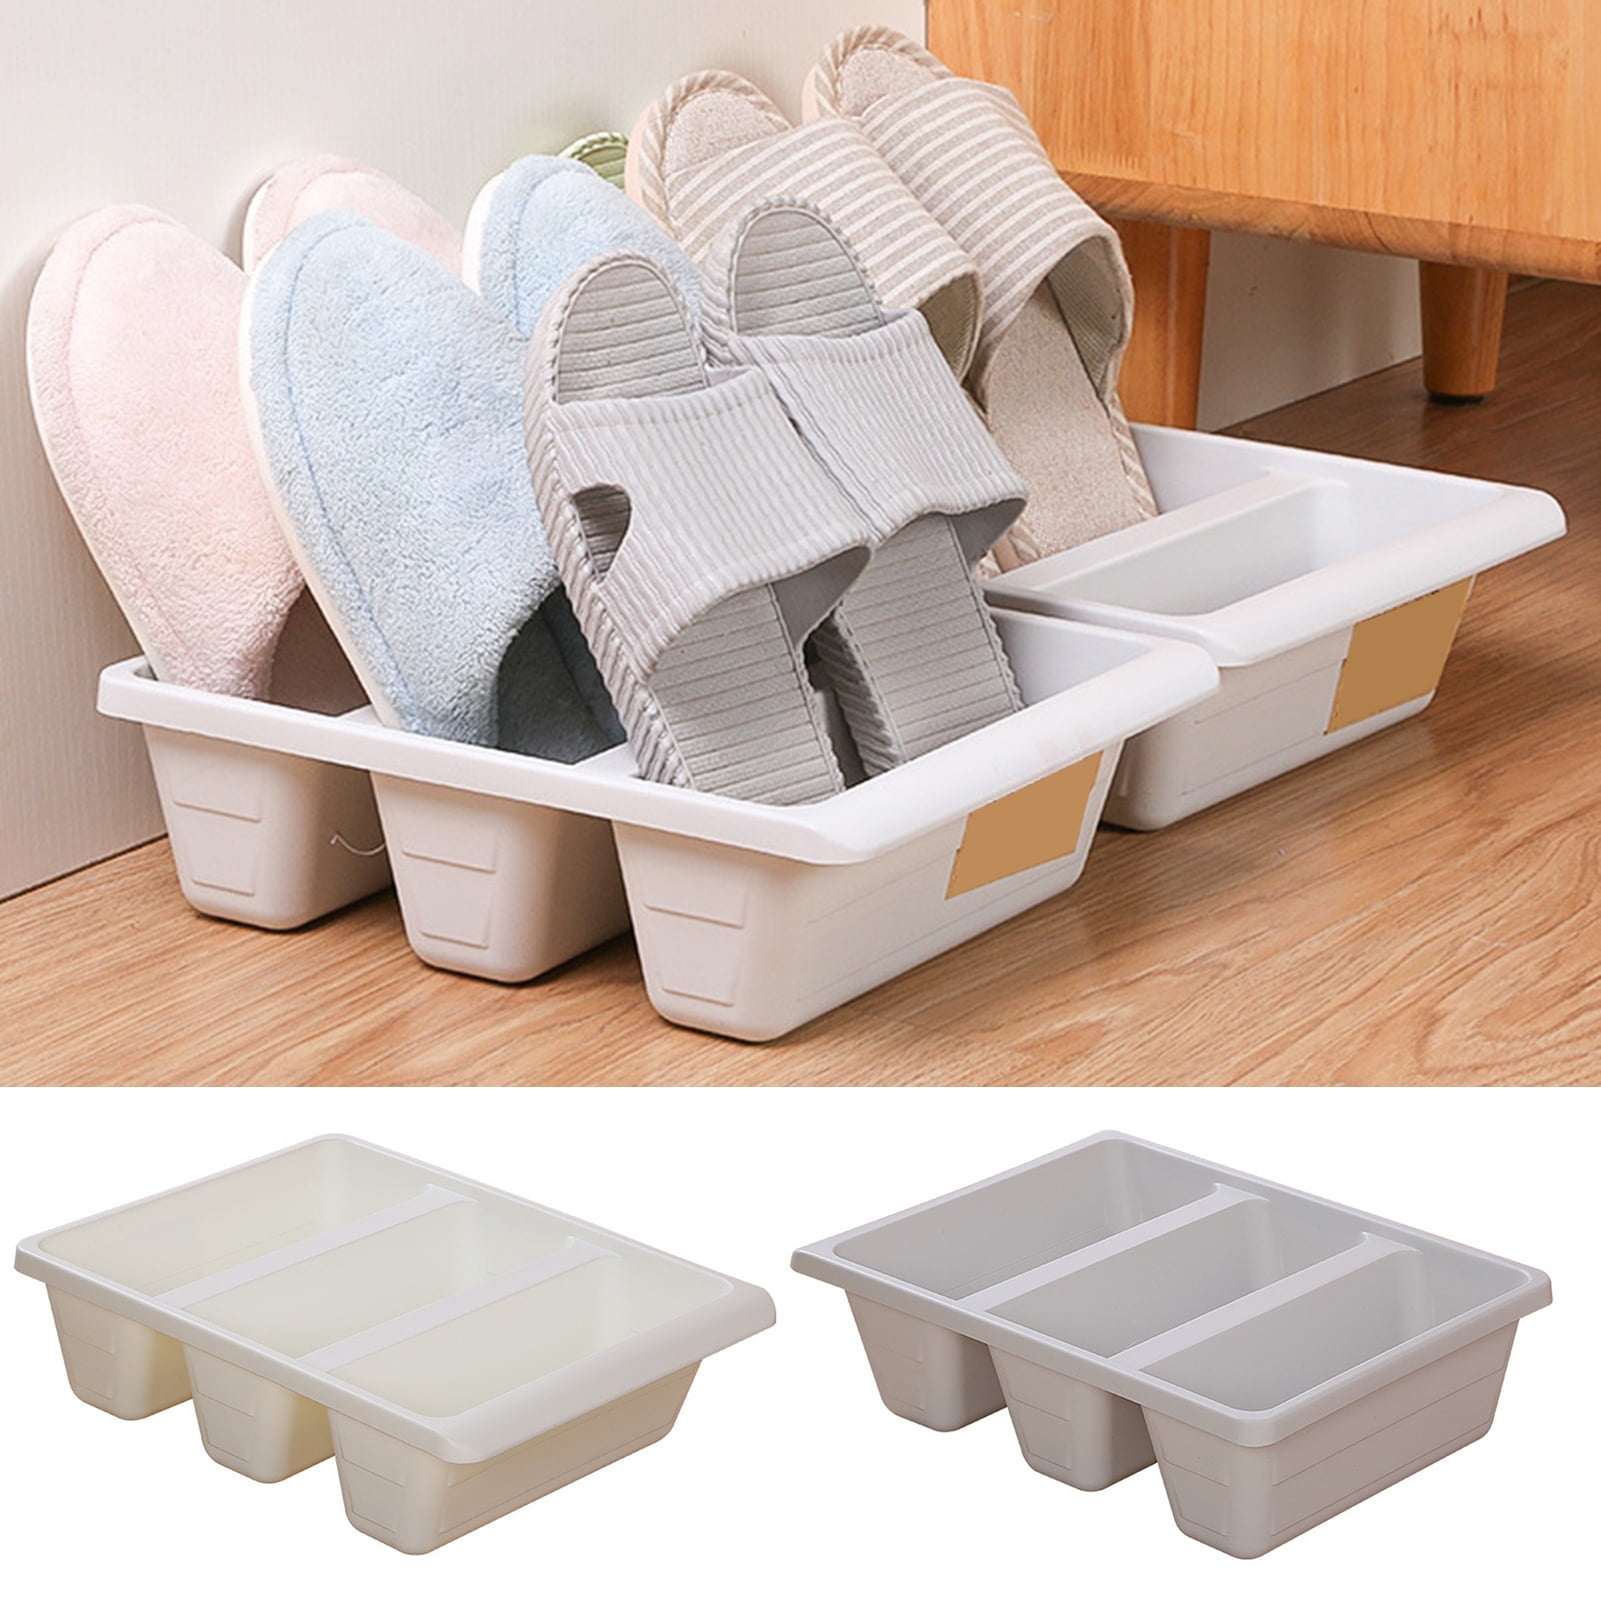 Nicewell Vertical Shoe Rack for Small Spaces, 9-Tiers Narrow Shoe